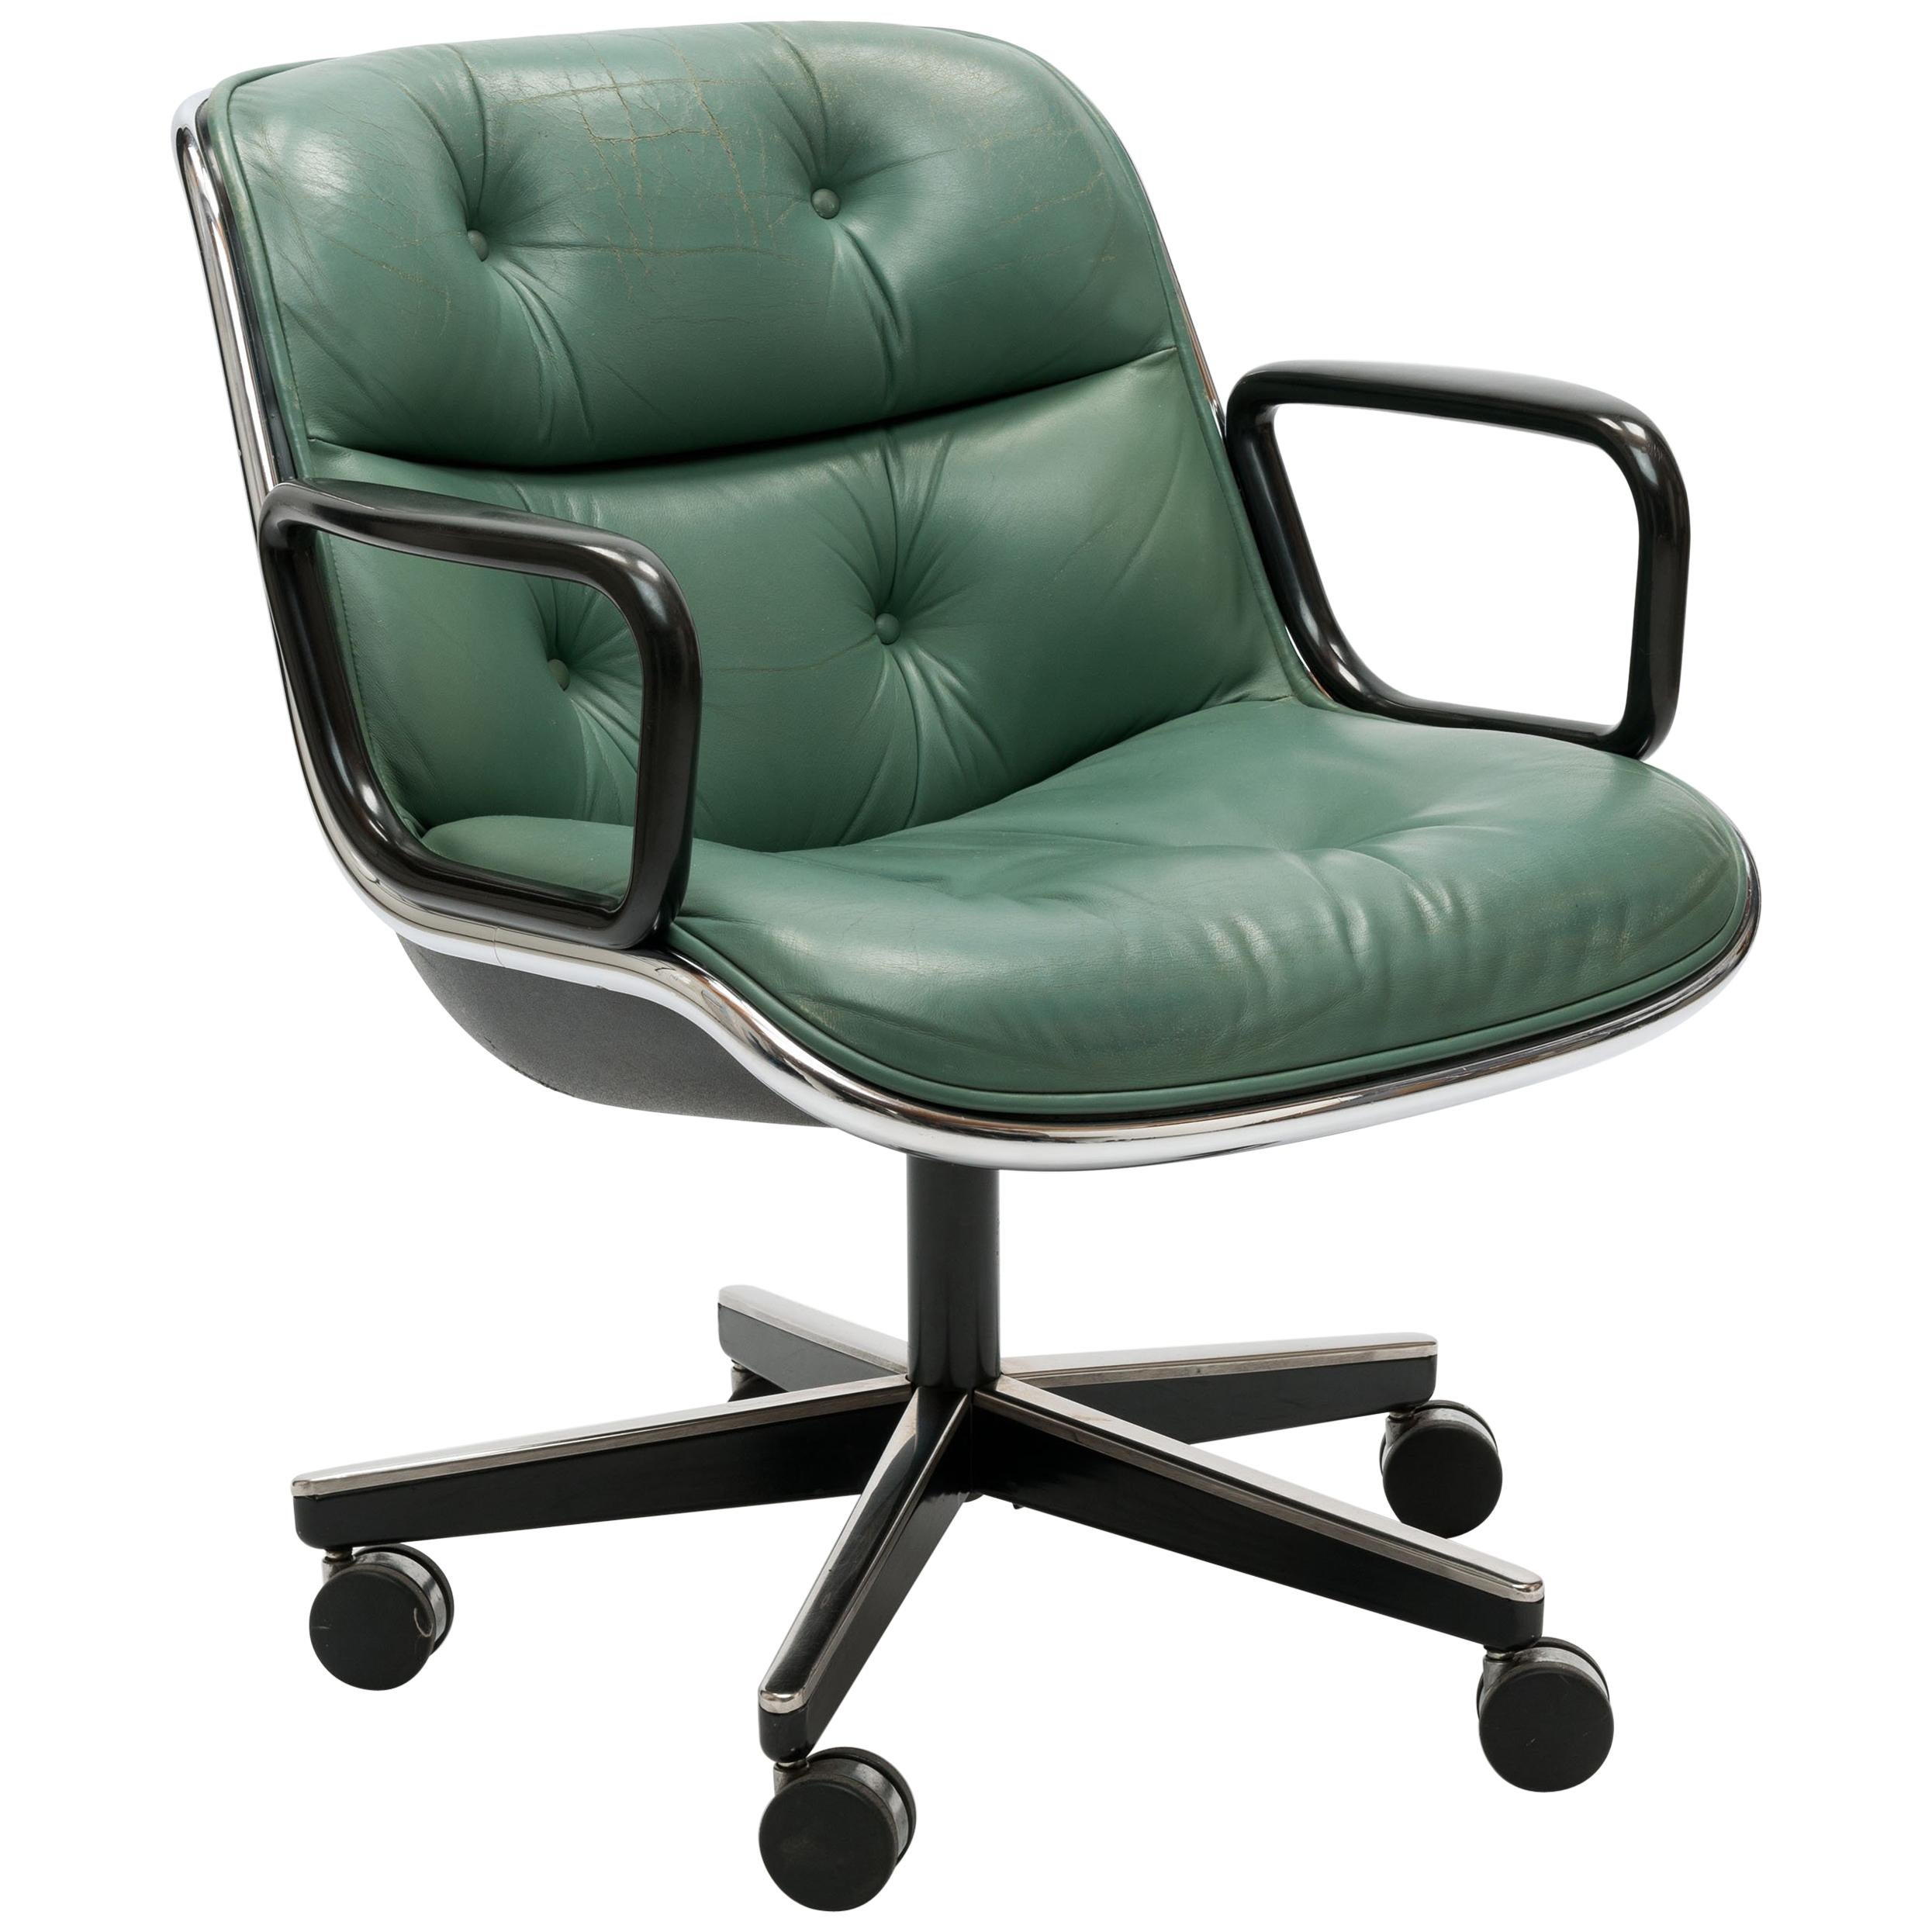 Charles Pollock Executive Swivel Office Chair in Seafoam Green Leather by Knoll